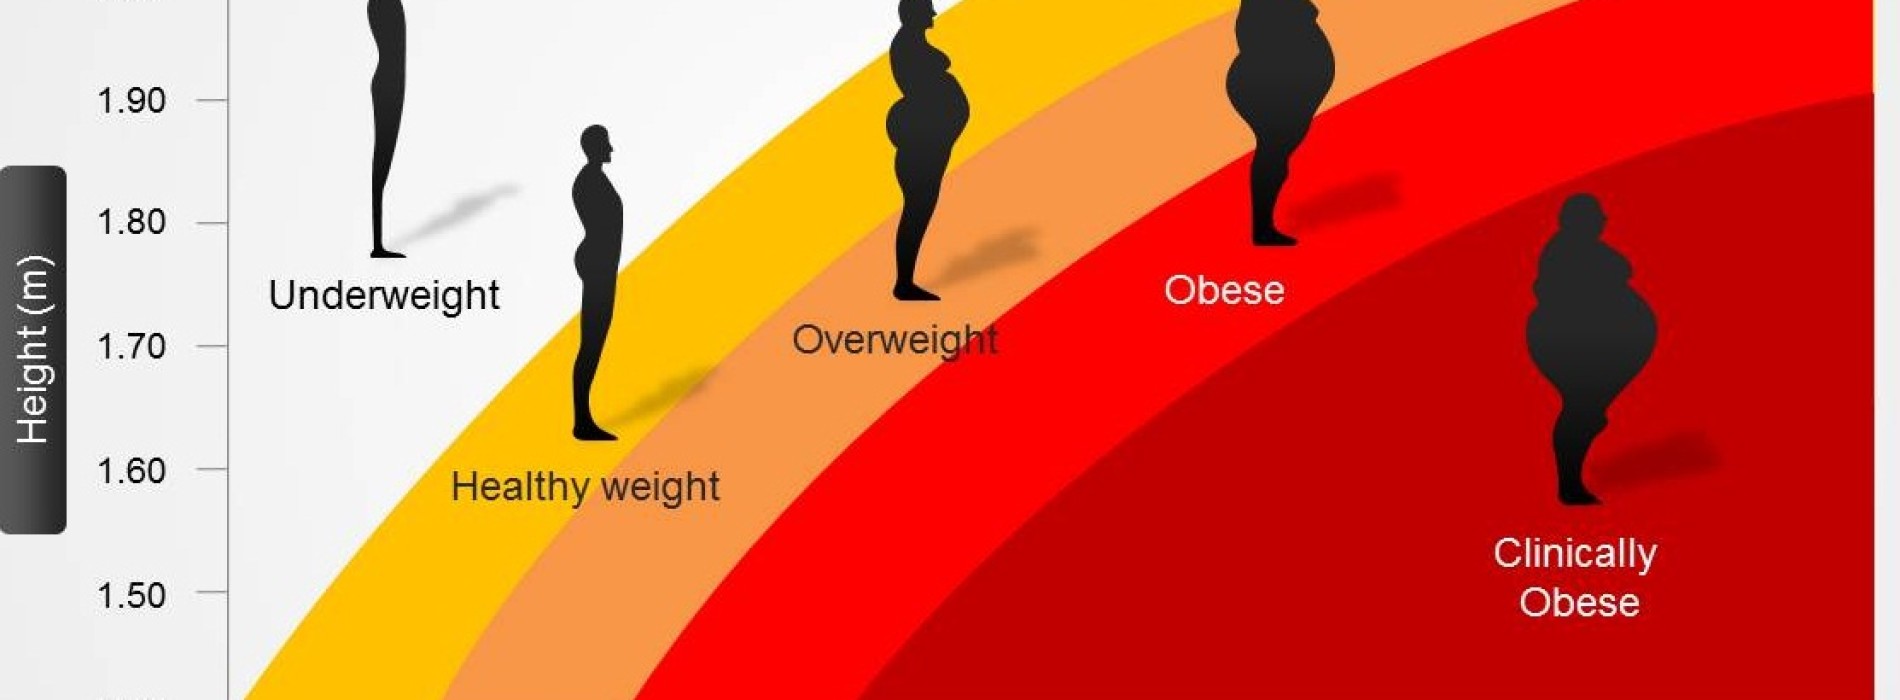 Body Mass Index (BMI) Calculator now available on NHO